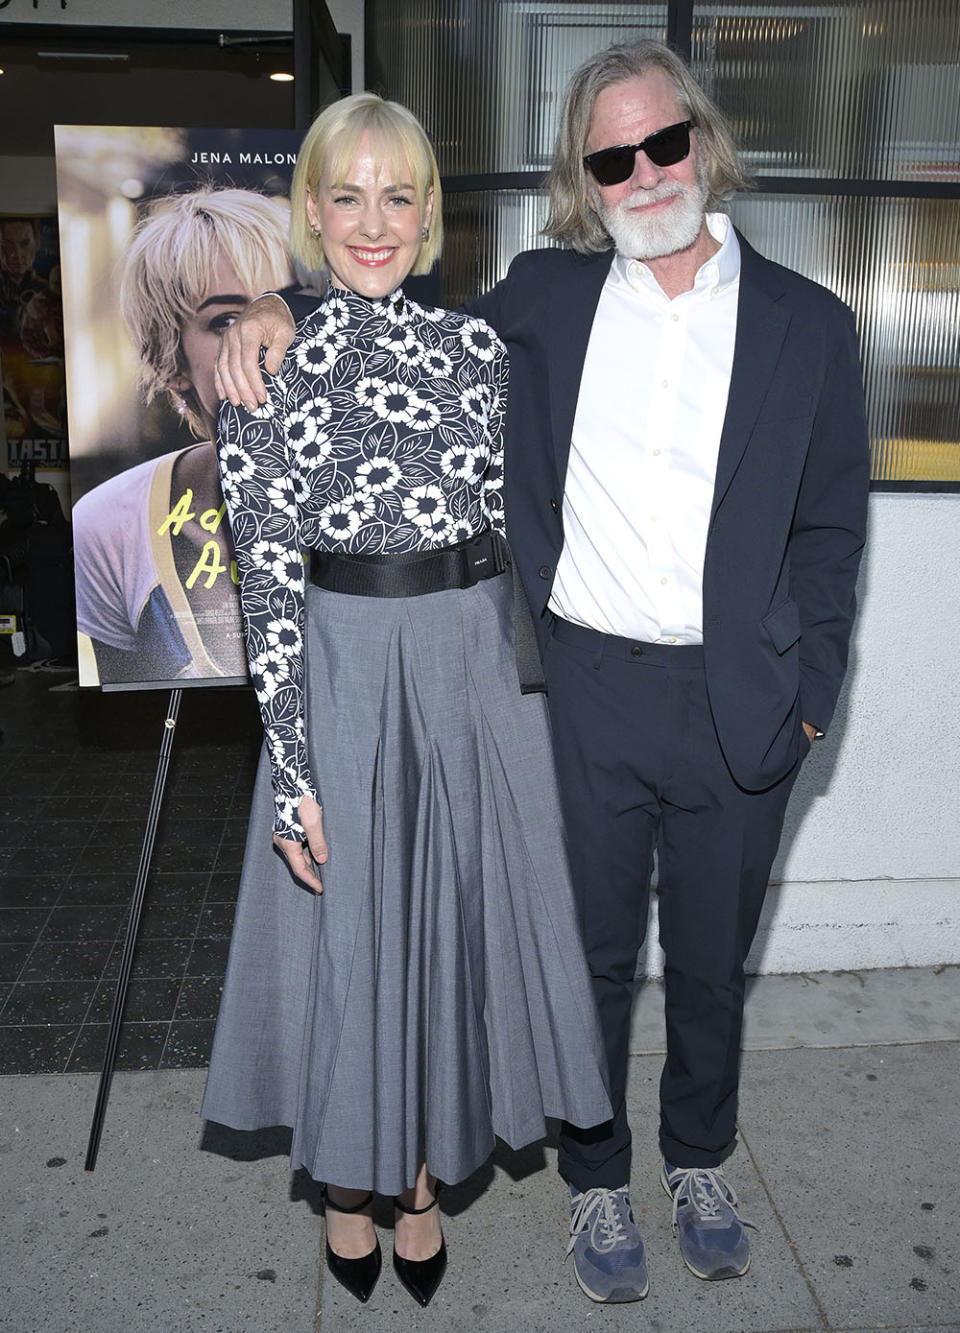 Jena Malone and M. Cahill attend the Los Angeles premiere of "Adopting Audrey" at Brain Dead Studios LA on August 22, 2022 in Los Angeles, California.